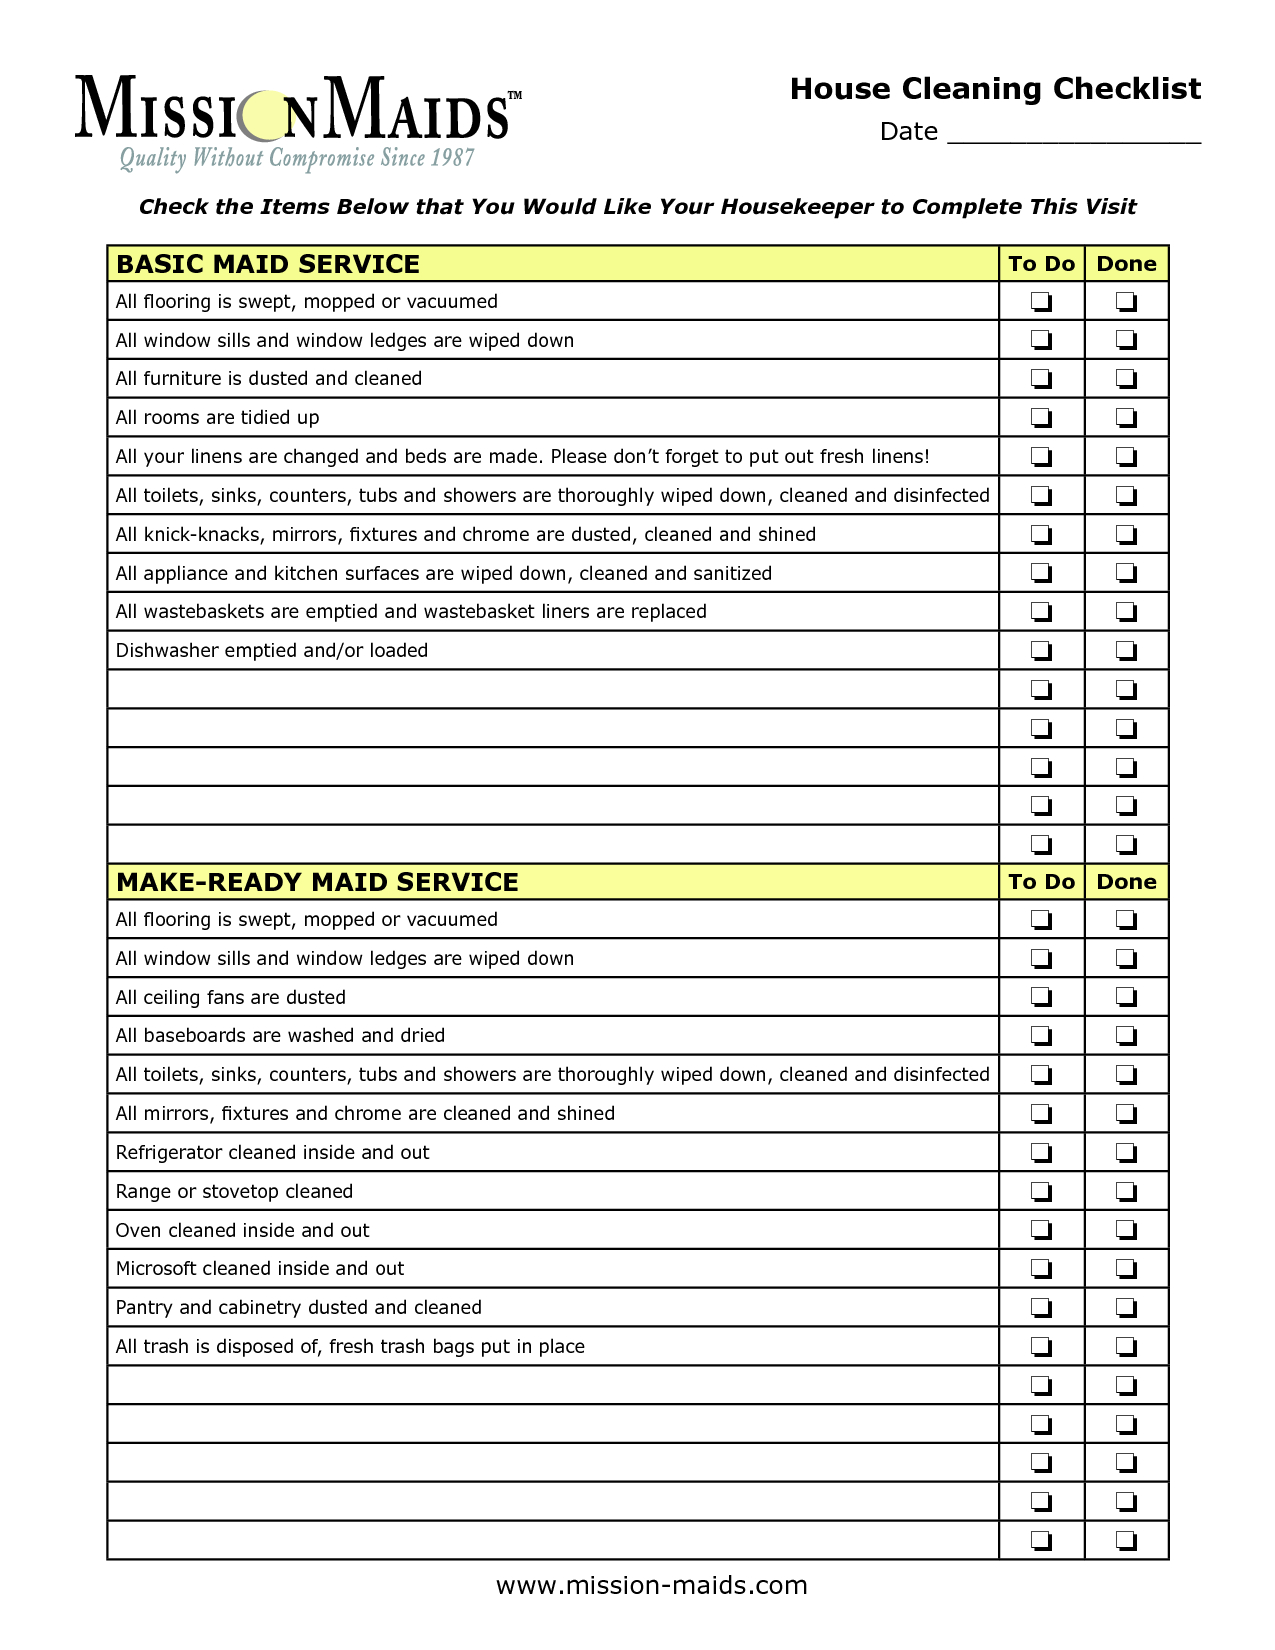 Cleaning Service Checklist Printable - Google Search | Business - Free Printable House Cleaning Checklist For Maid